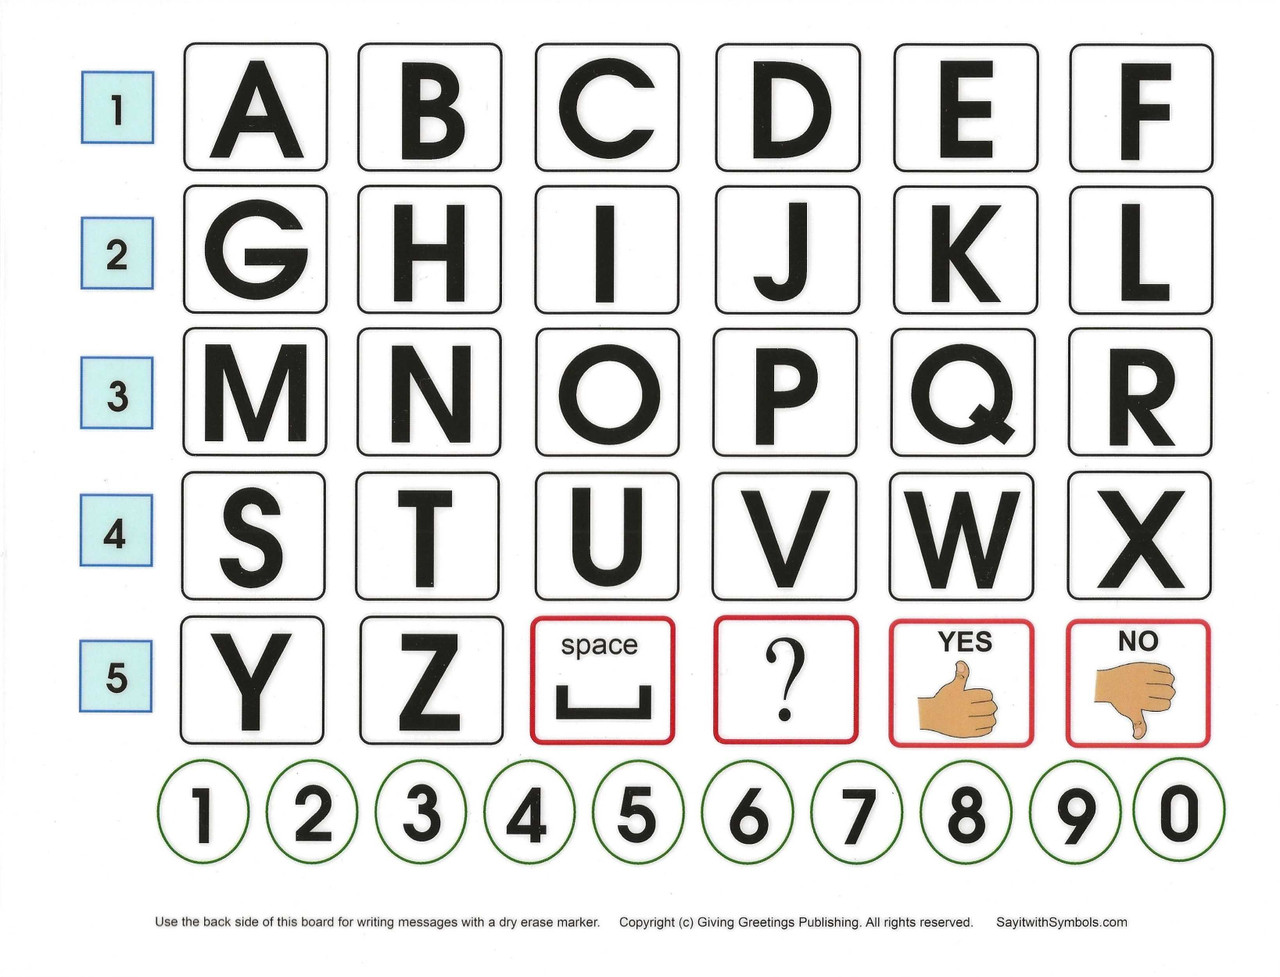 Laminated Alphabet Letter Spelling Board for Non verbal Patients Say